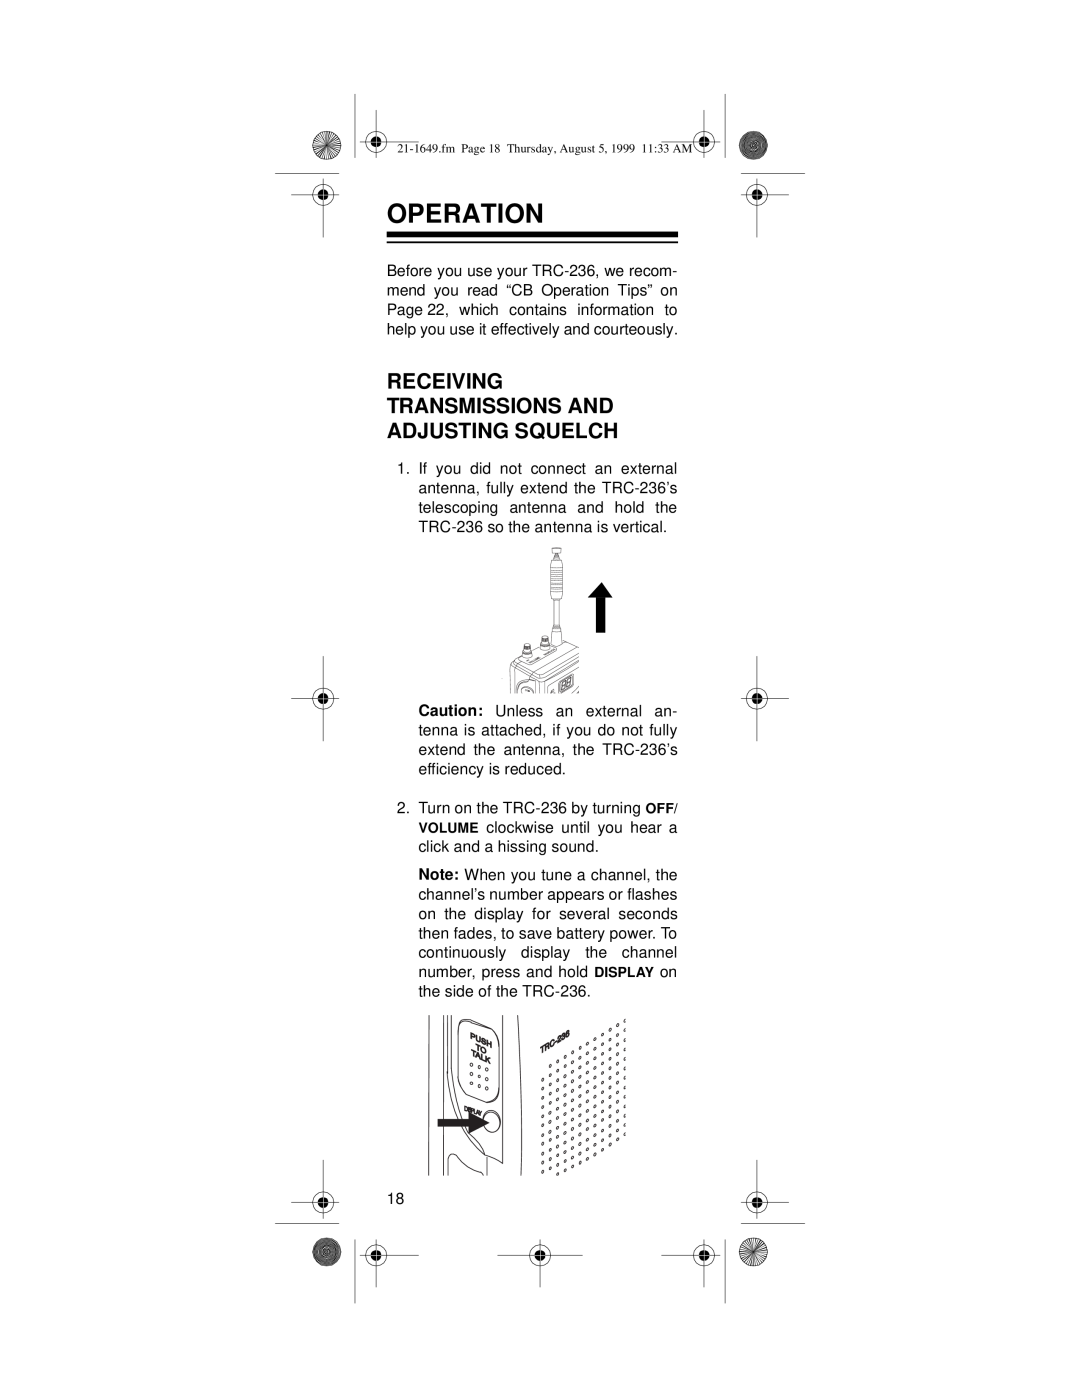 Radio Shack TRC-236 owner manual Operation, Receiving Transmissions And Adjusting Squelch 